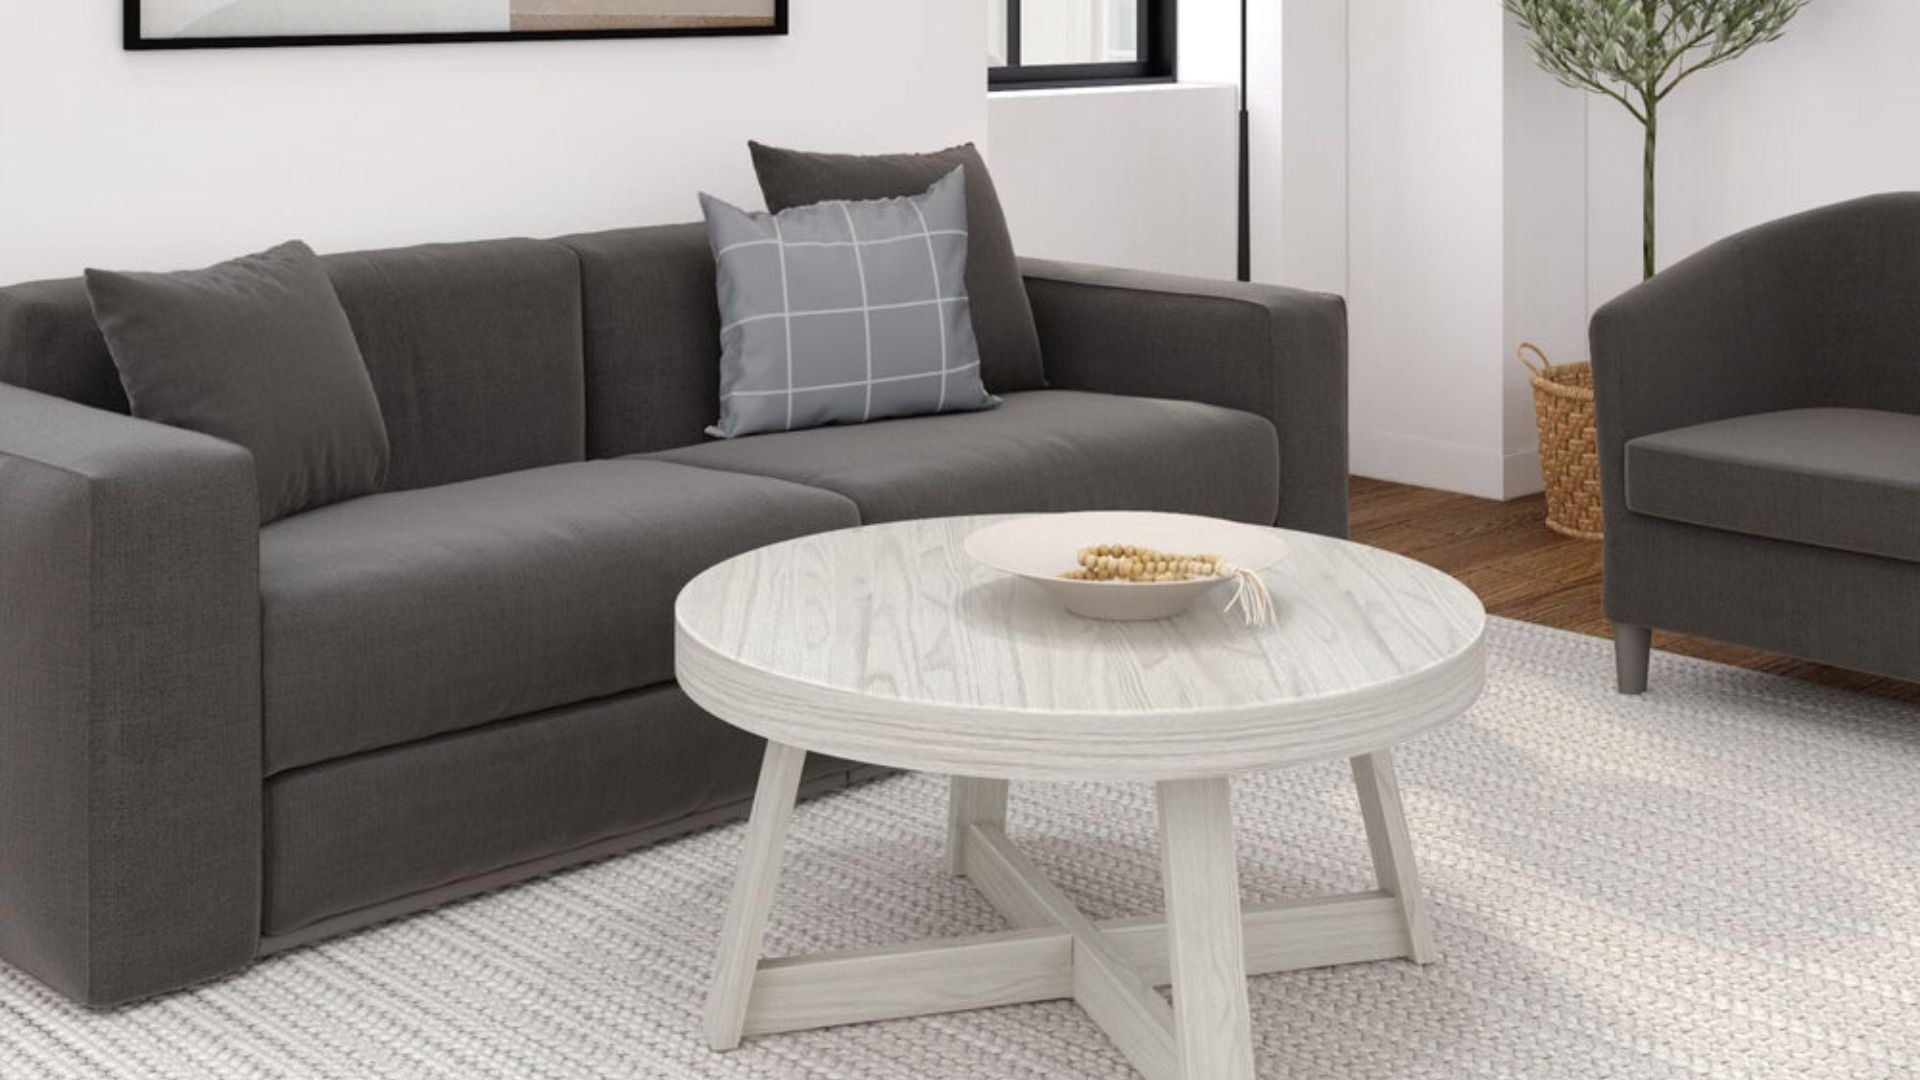 Solid wood circle coffee table in white sand with dark gray couch and white rug